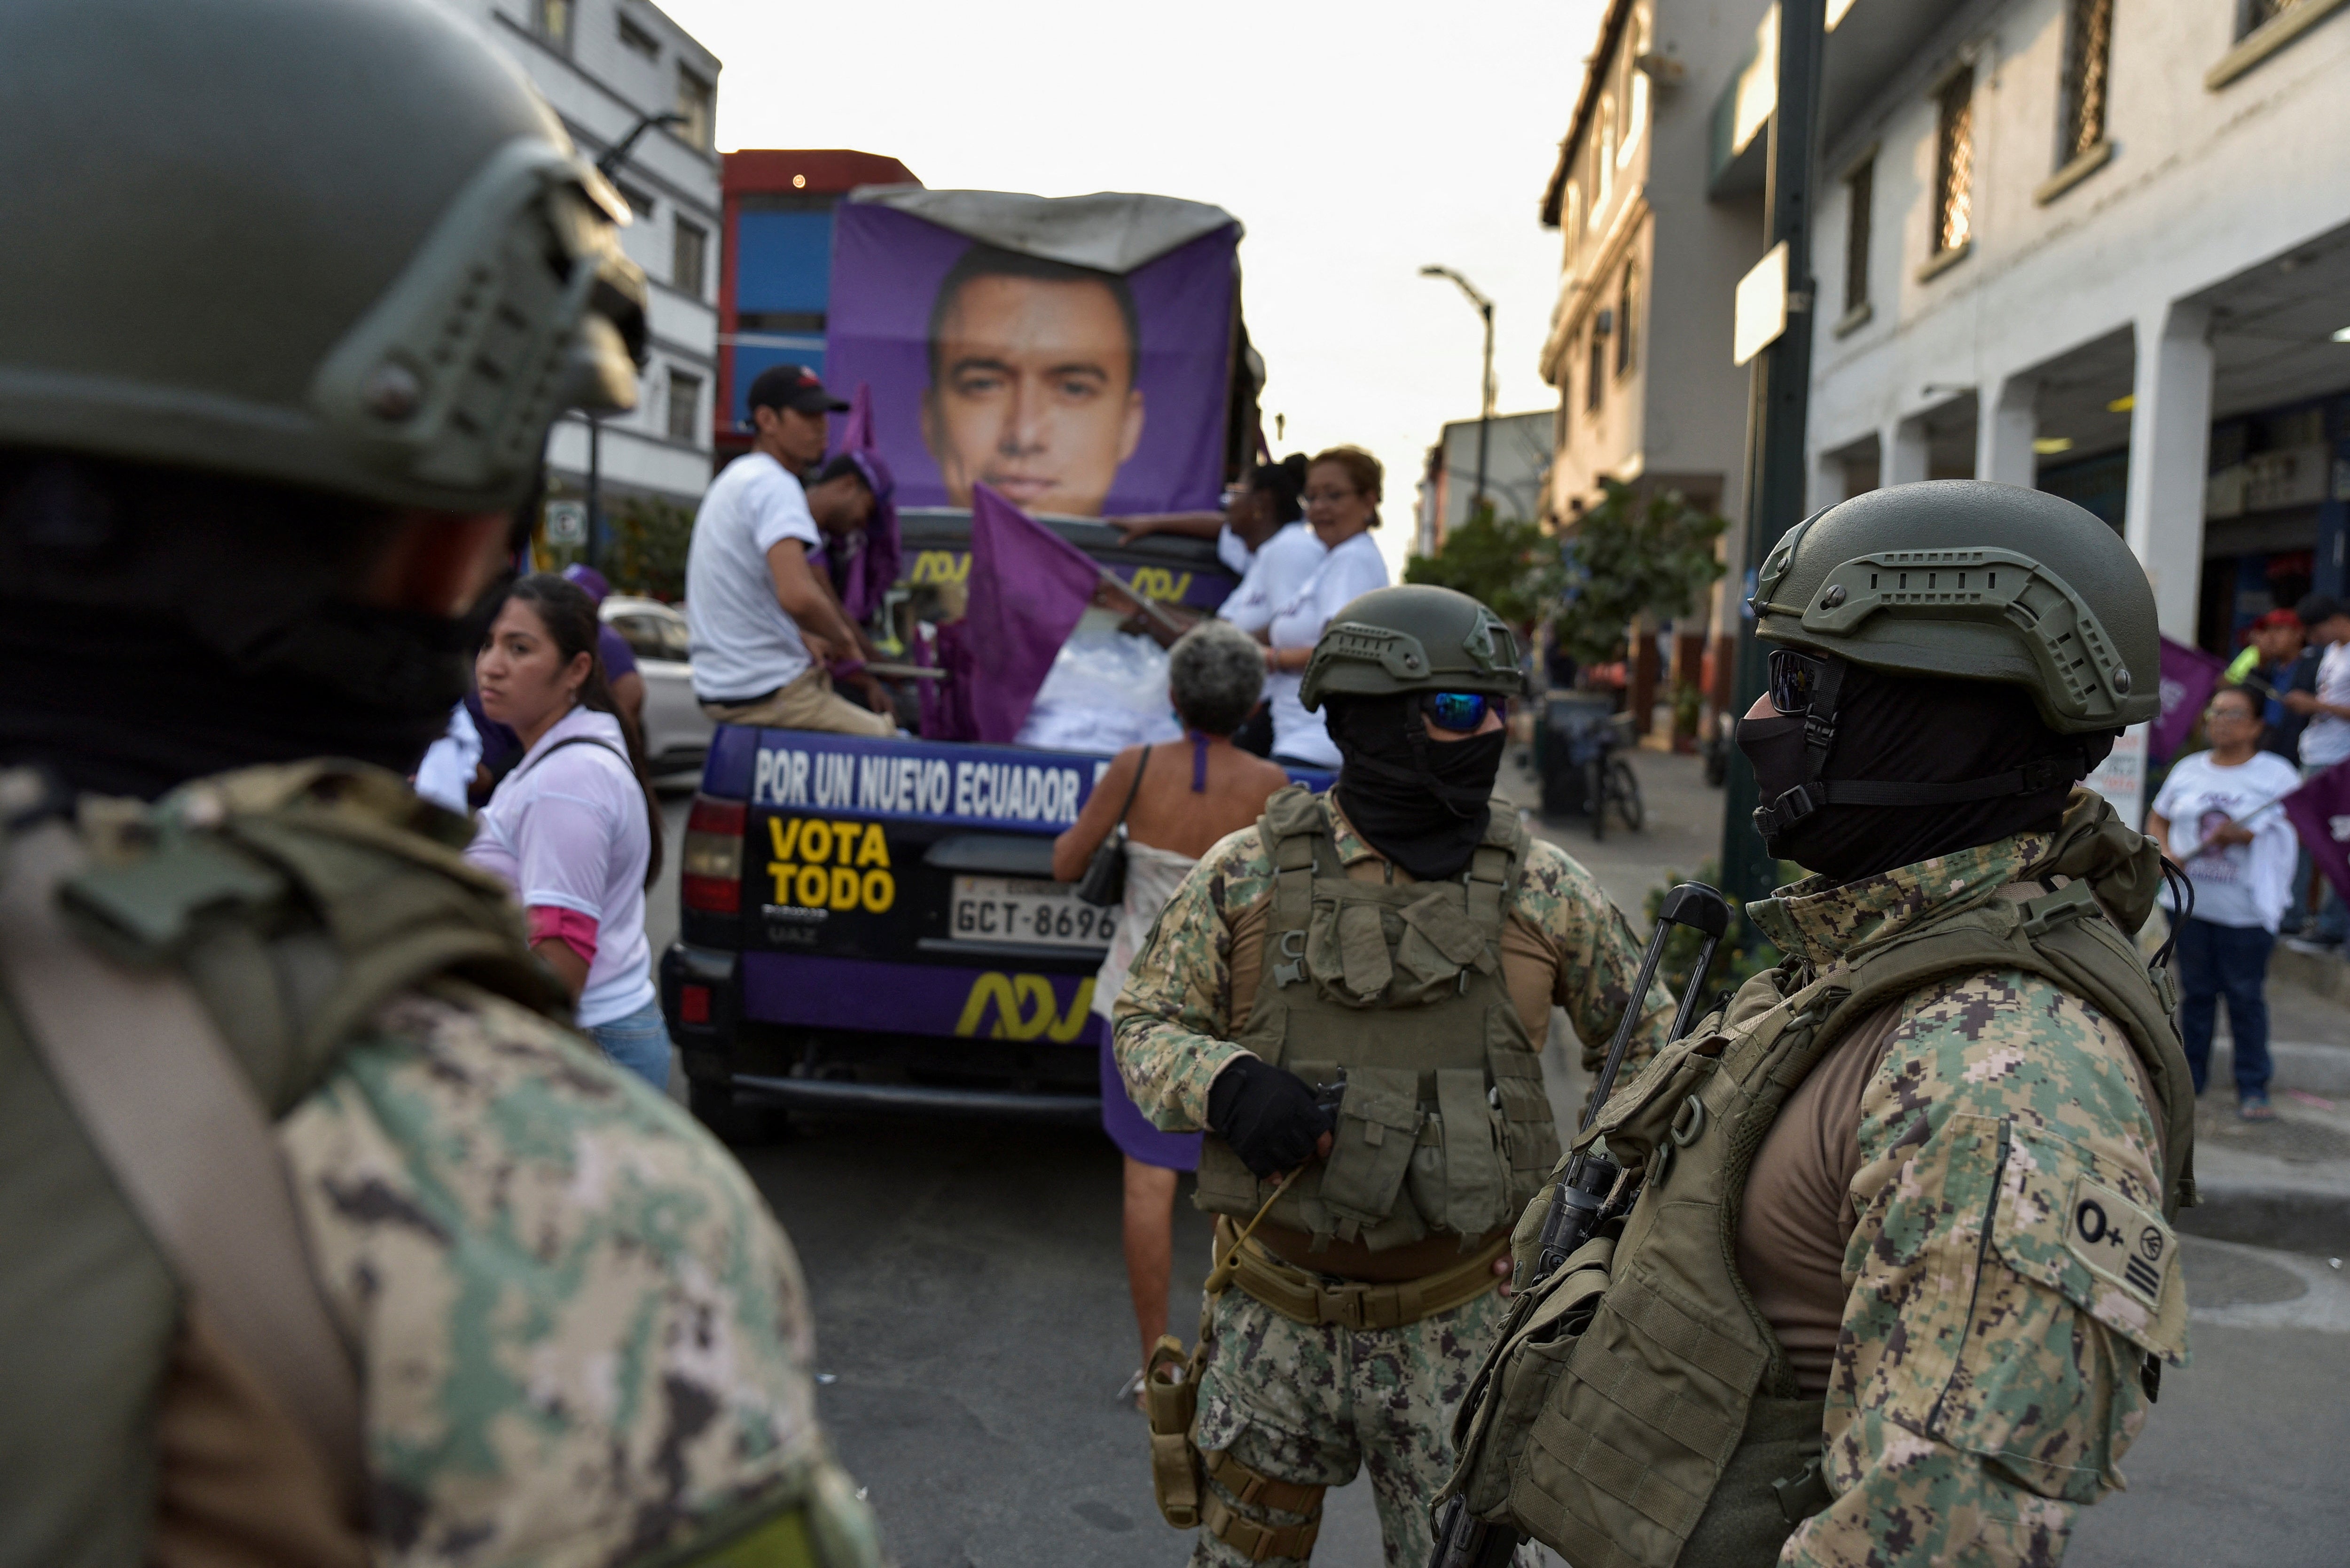 Soldiers secure an area before the arrival of Ecuadorean presidential candidate Daniel Noboa, who was taking part in a rally on Friday ahead of the October 15 run-off